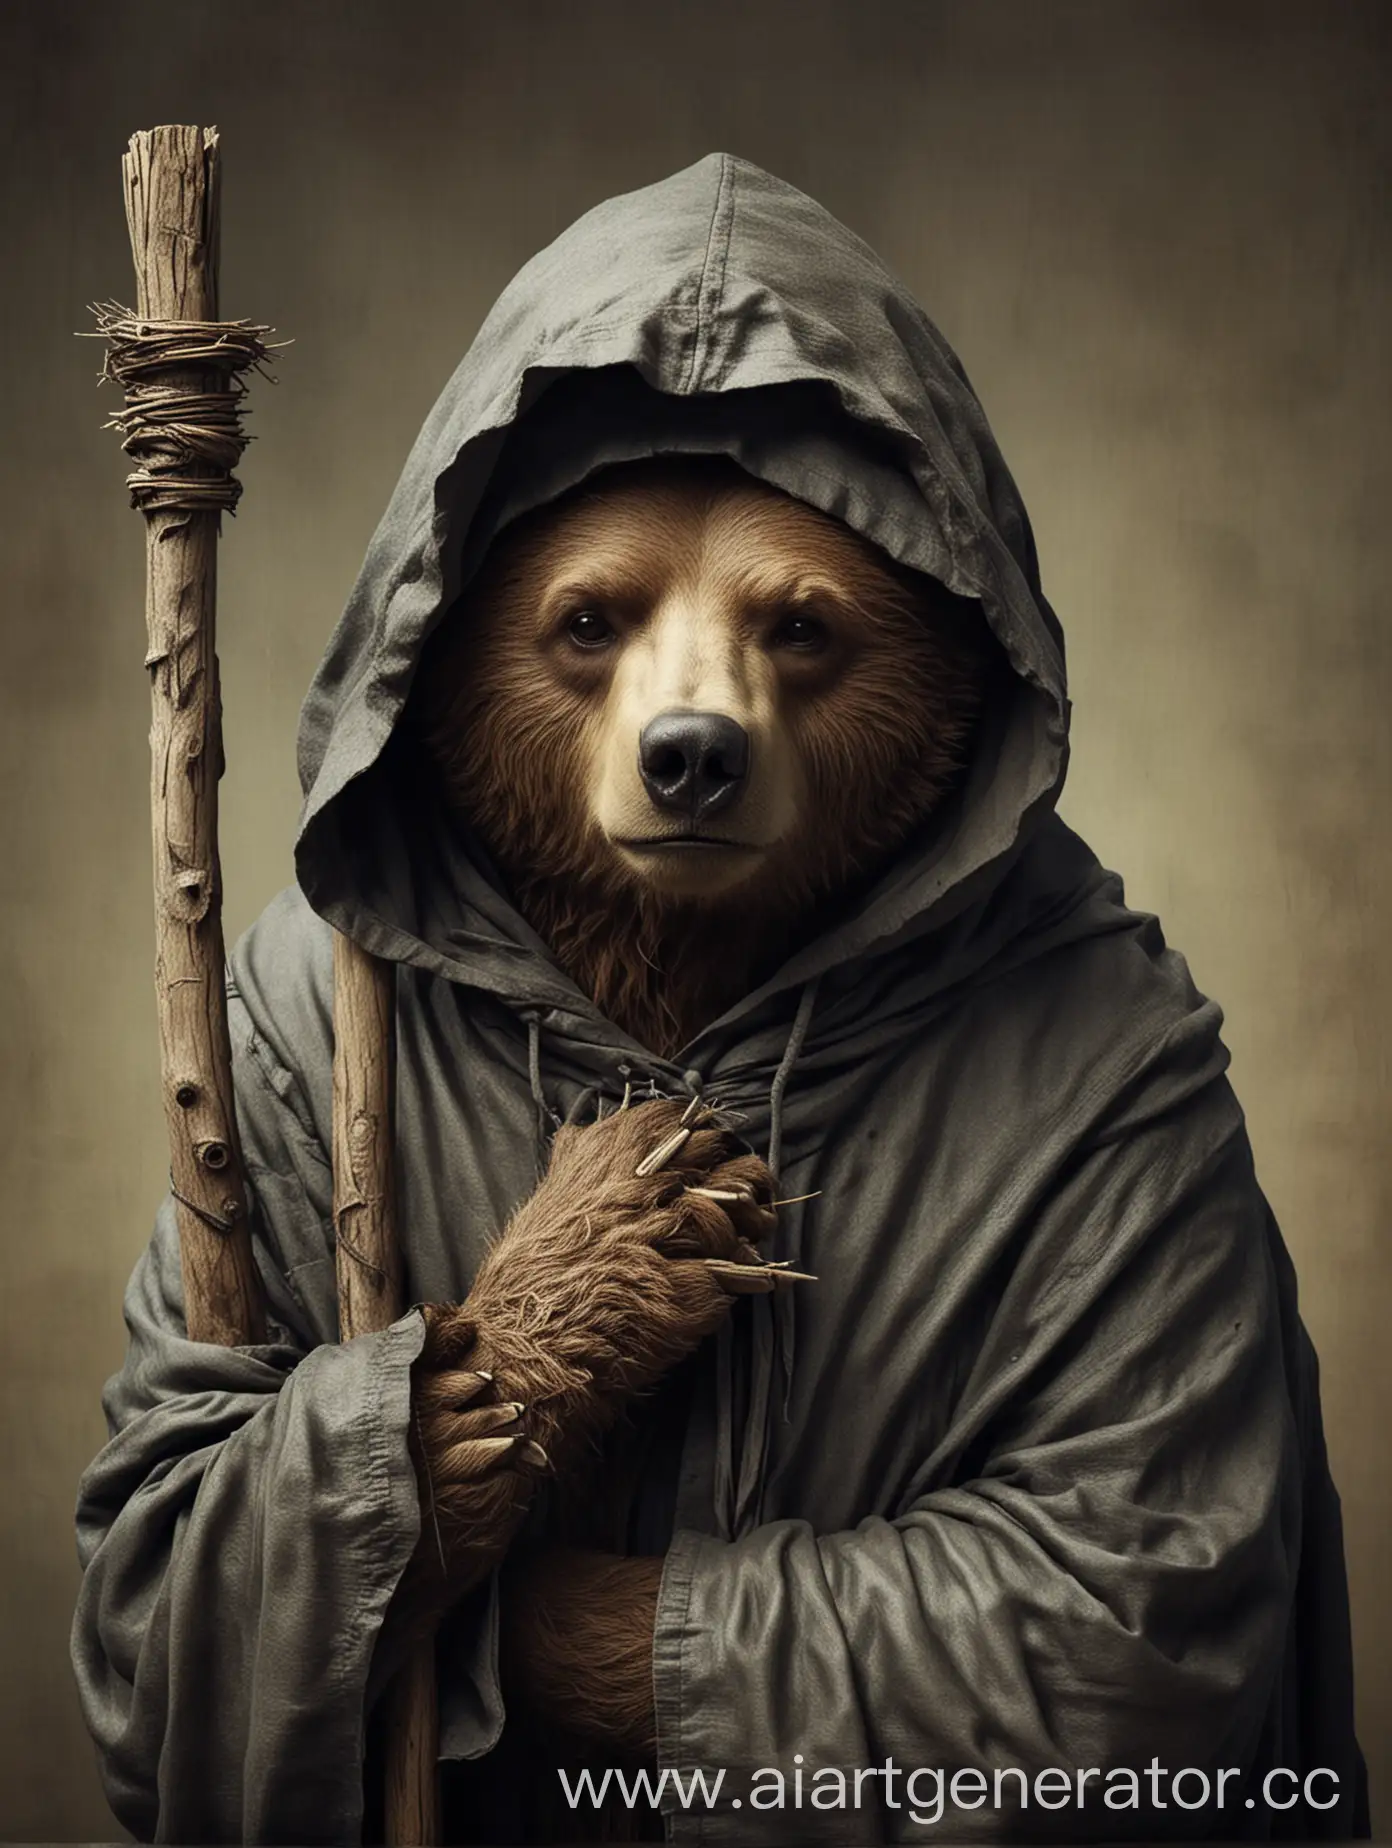 Old-Wise-Bear-with-Hood-and-Staff-in-Thoughtful-Pose